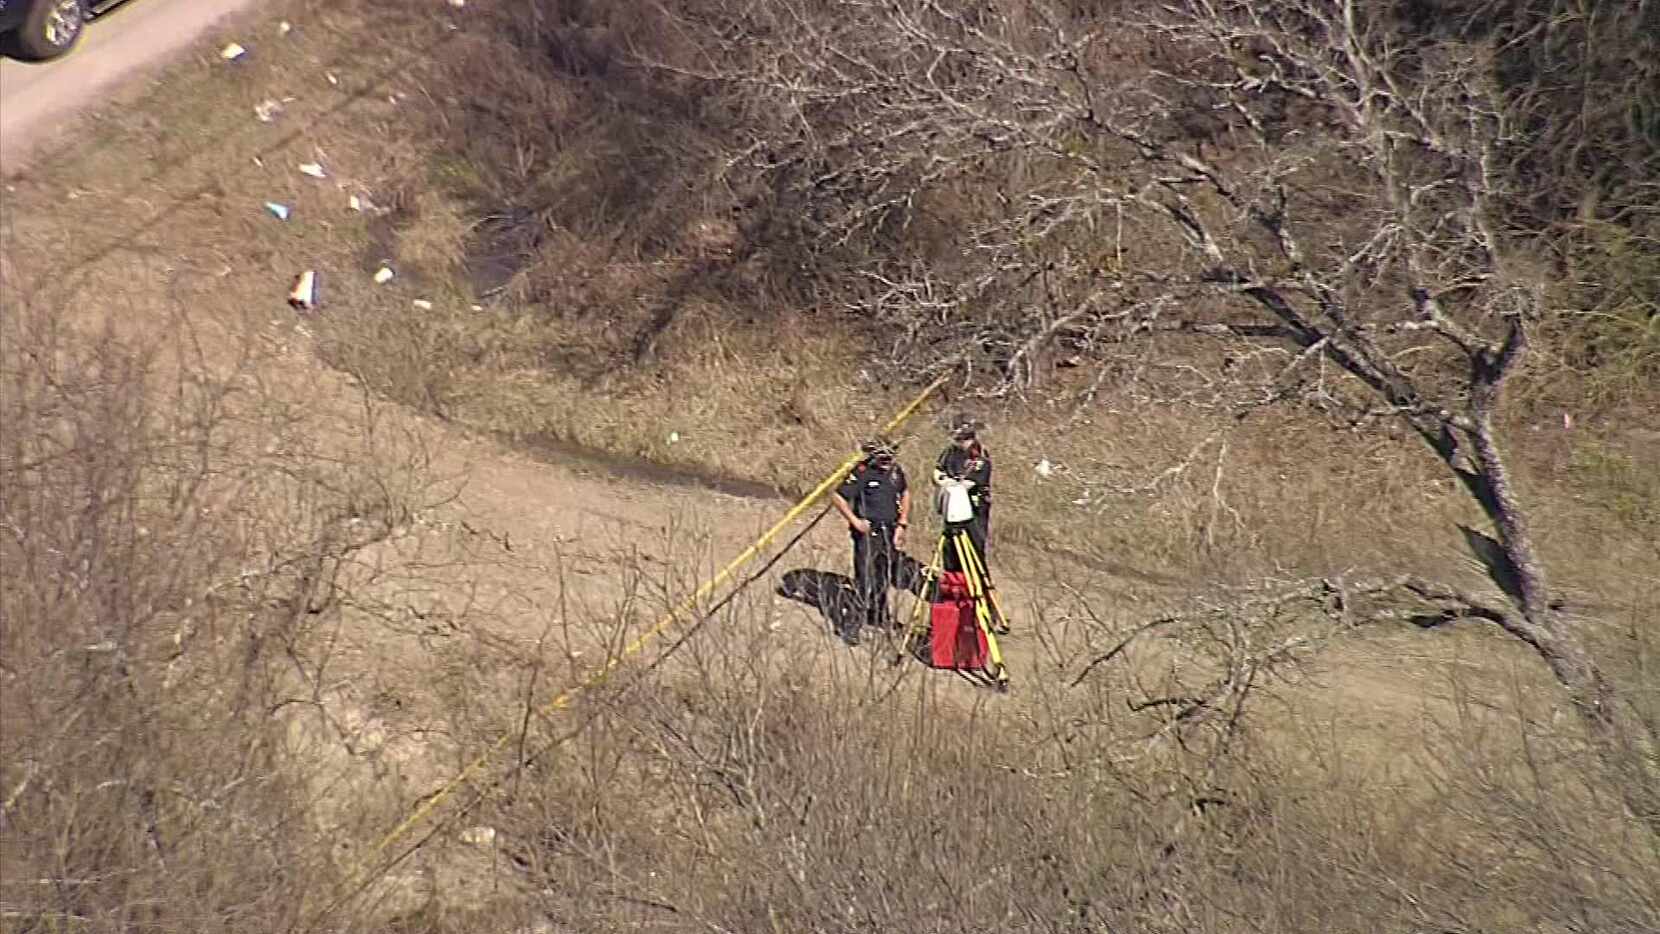 Yellow tape marked the scene where human remains were found Wednesday in Anna.